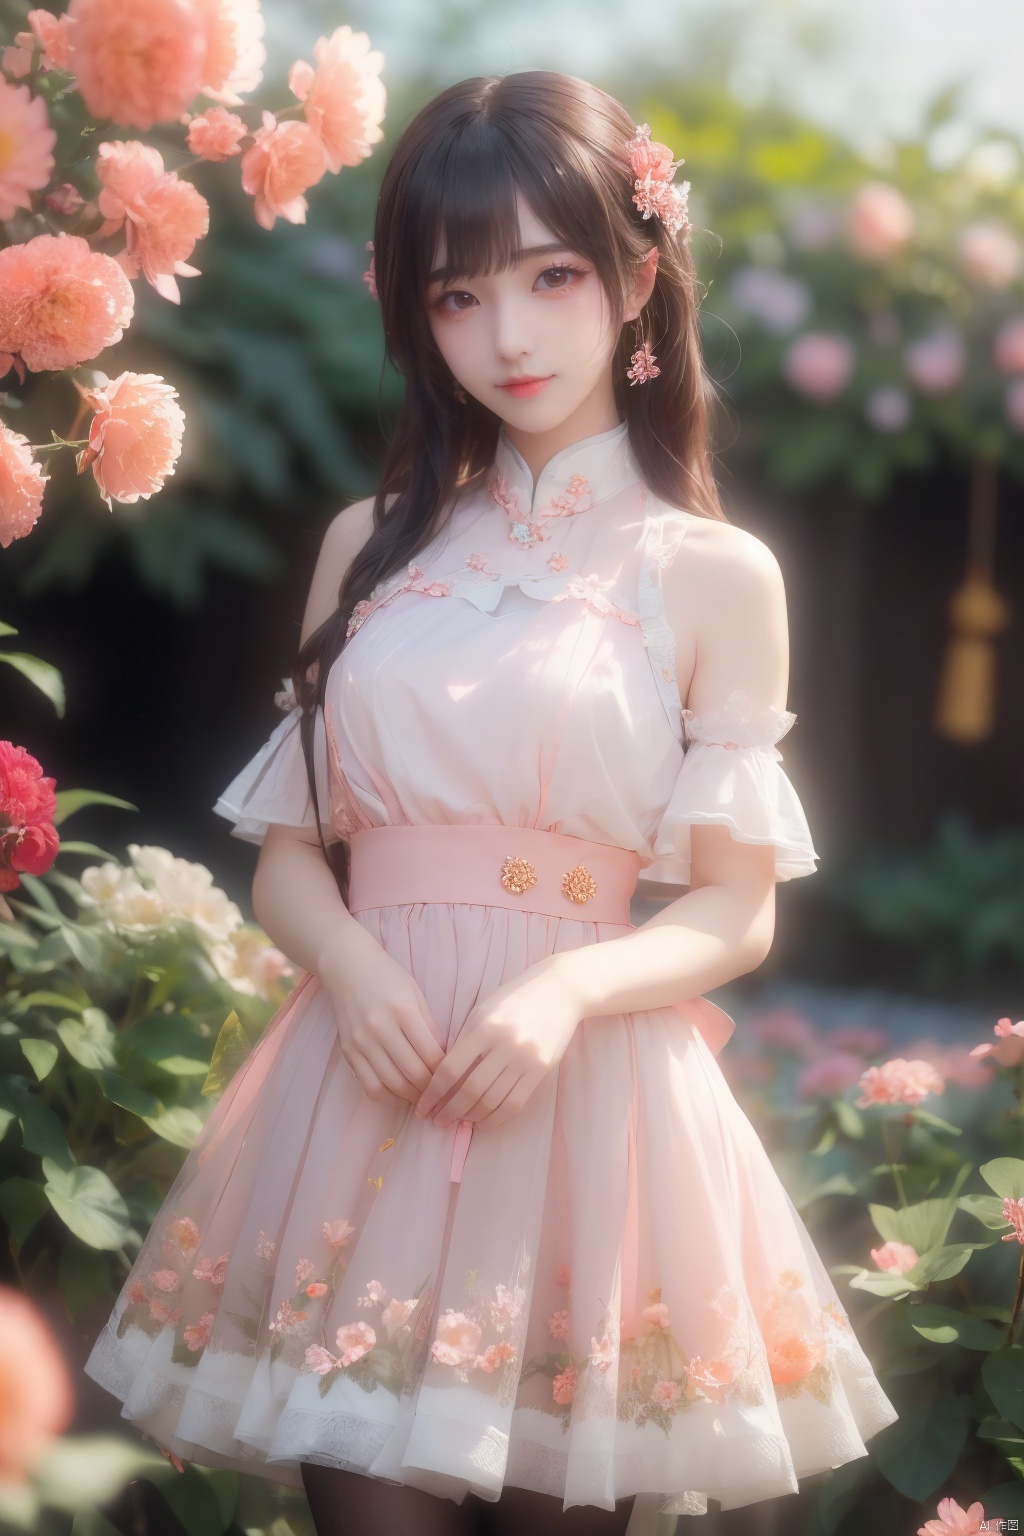  1girl,yuzu,qingsha,medium shot,solo,emotional_face,flower dress,flower armor,looking_at_viewer,green_theme,colorful blooming flowers,forming a dreamlike world,flower_garden,flowers everywhere,greens,pinks,bokeh,cinematic,exposure blend,(teal and orange:0.85),(muted_colors, dim_colors, soothing_tones:1.3),high contrast,low saturation,(Canon RF 85mm f/1.2L),tifa,huolinger,glint sparkle,pantyhose,xinniang,eyesseye,21yo girl,ajkds,yunbin,